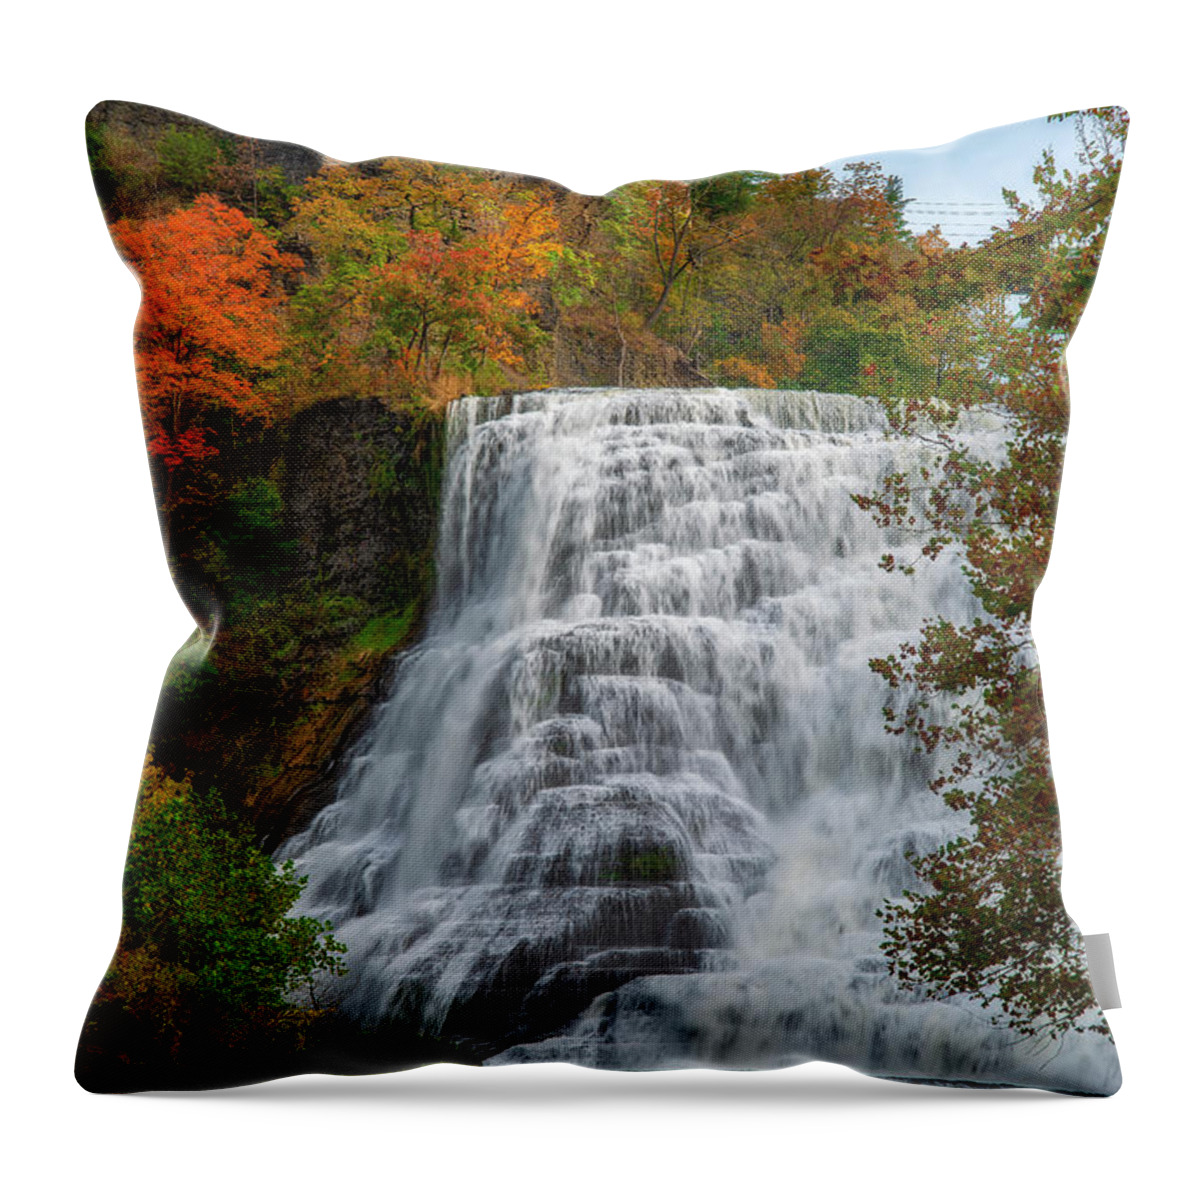 Ithaca Falls Throw Pillow featuring the photograph Ithaca Falls Autumn by Mark Papke